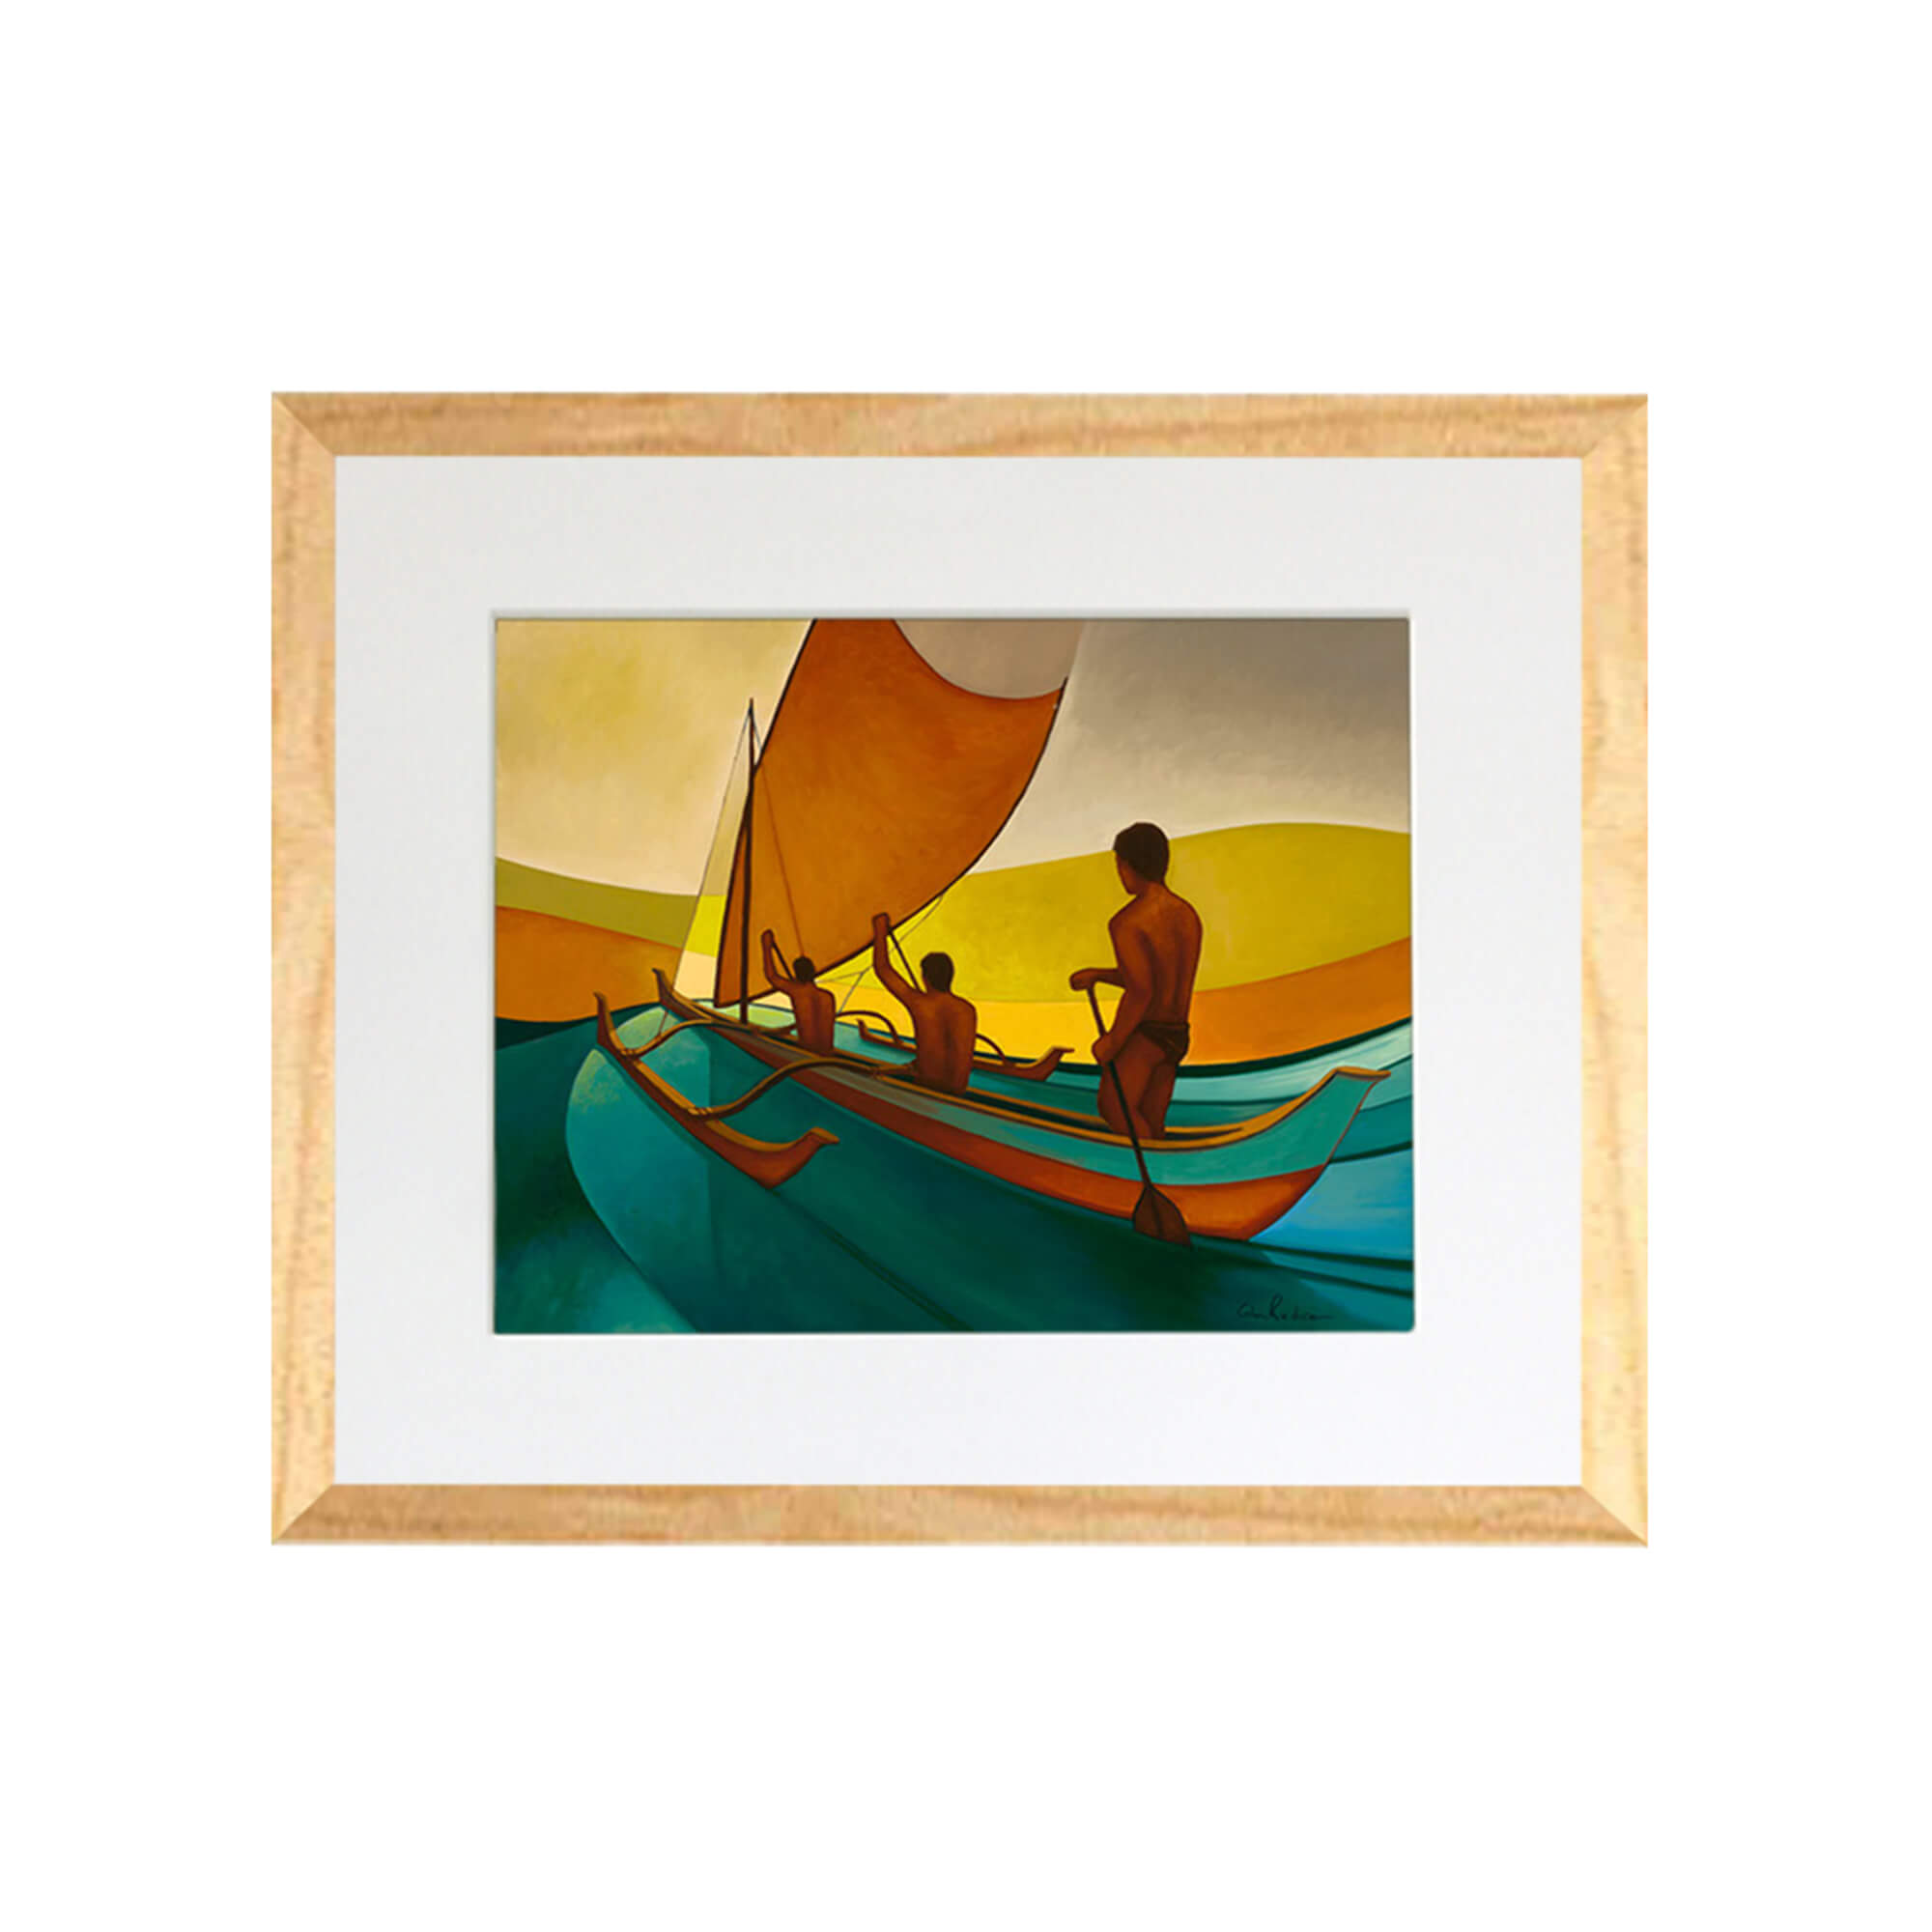 A sunset with men in a canoe by Hawaii artist Colin Redican